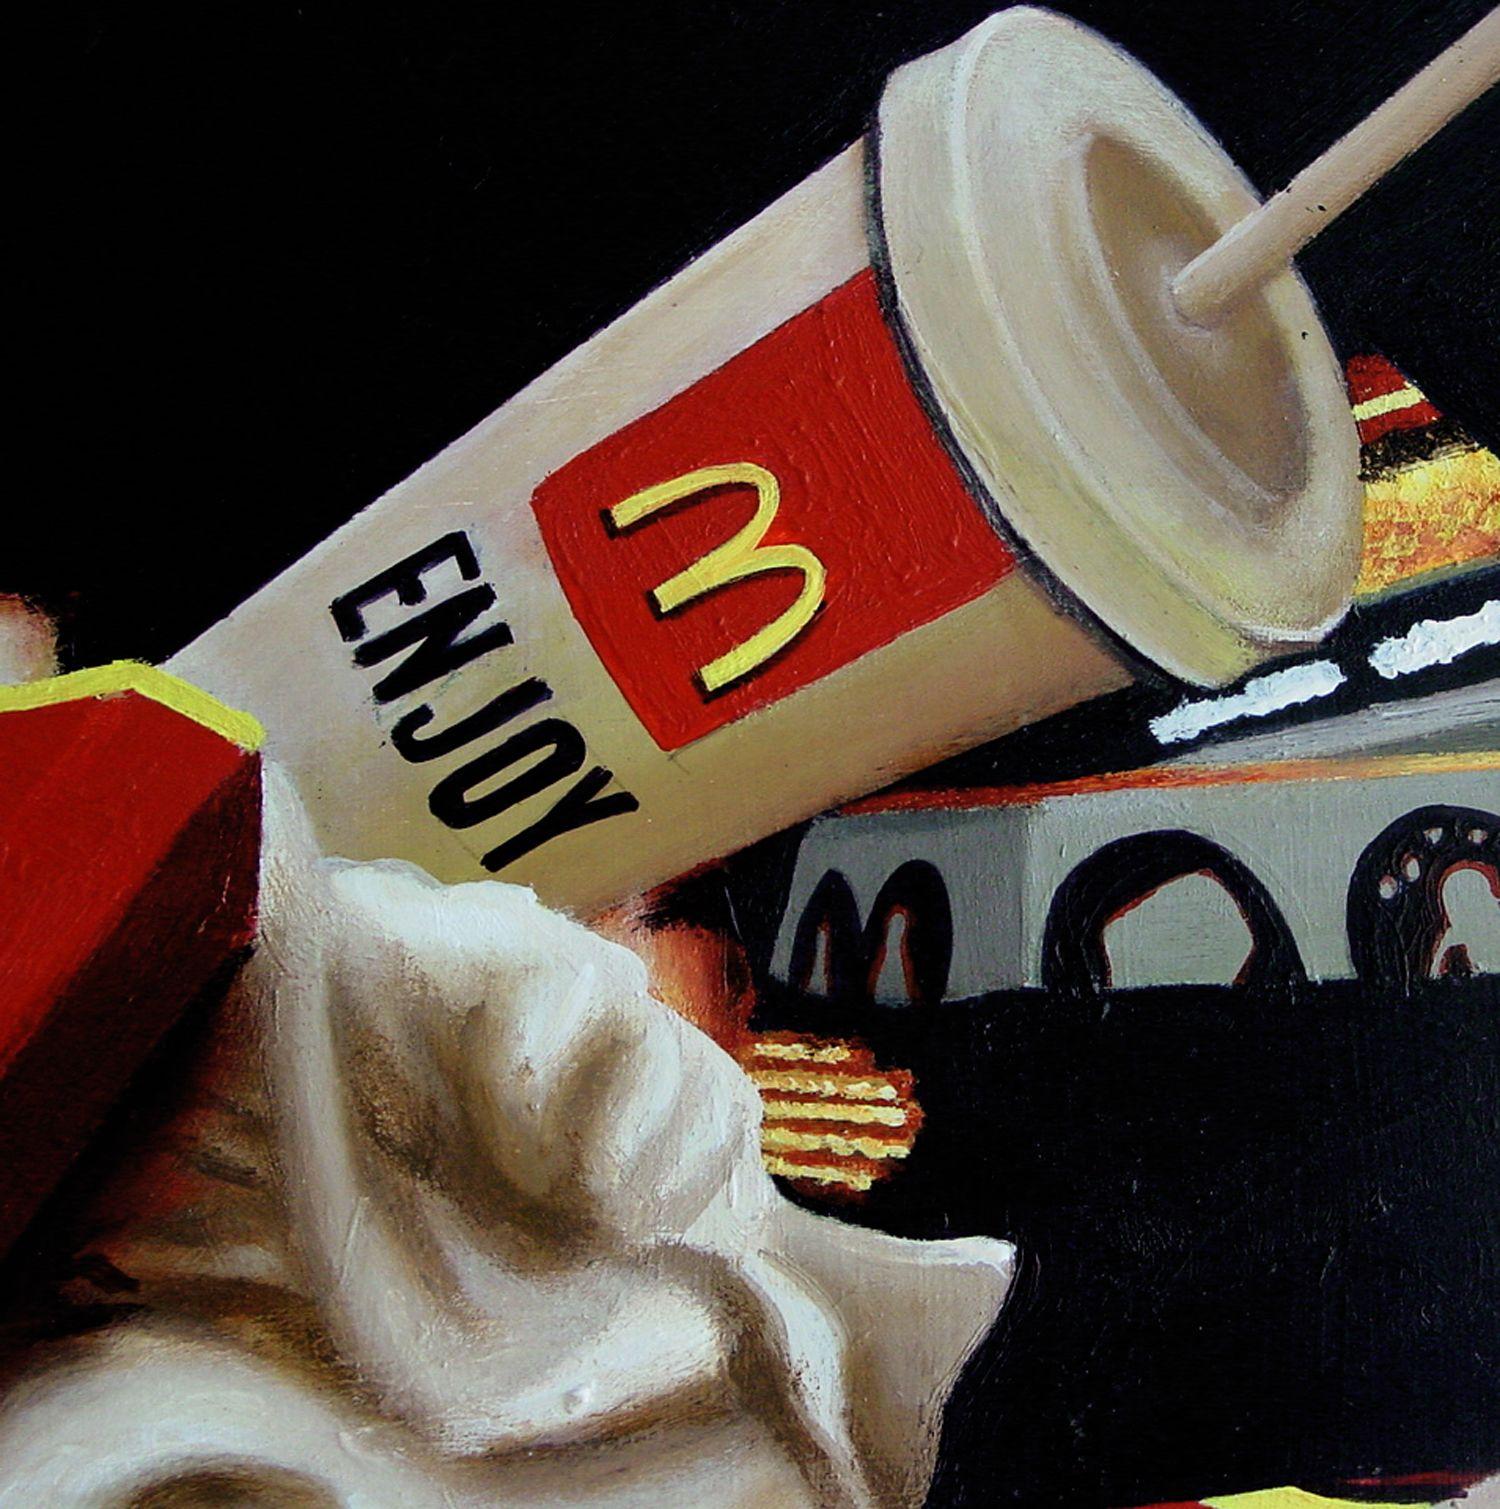 A little different perhaps than you're used from me, but when I saw these remnants of a McDonald's meal I knew it would be perfect for a still life. In Dutch tradition I decided to add meaning to the painting by adding the term 'vanitas' to the